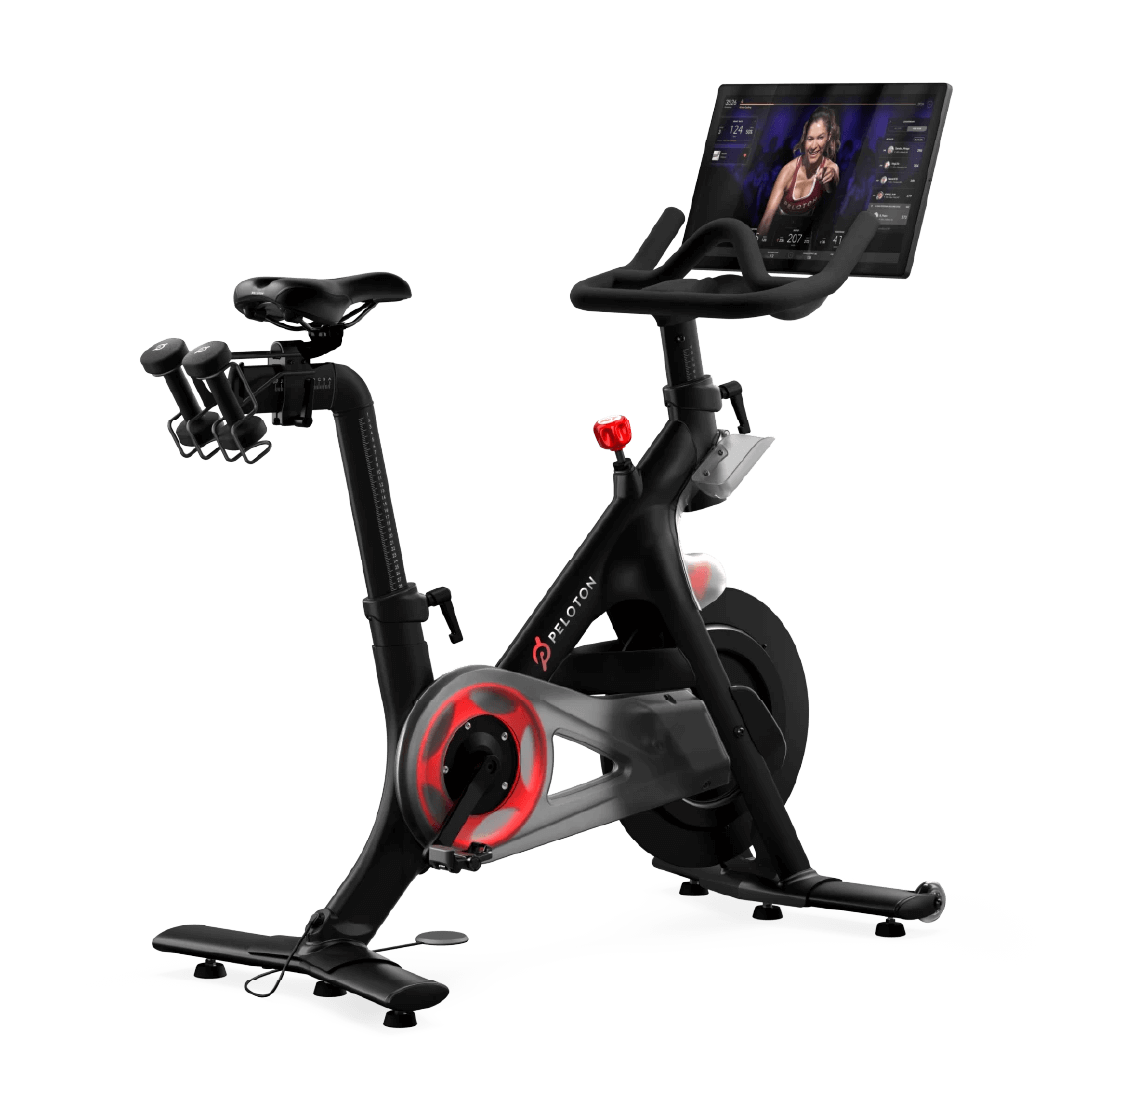    Compare freebeat bikes with Peloton bike. Immersive cardio and artist generated interactive virtual workout stages. The most connected home exercise bike. Cycling, strength training, cardio, and more, experience Lit Bike is features:  Auto Resistance S